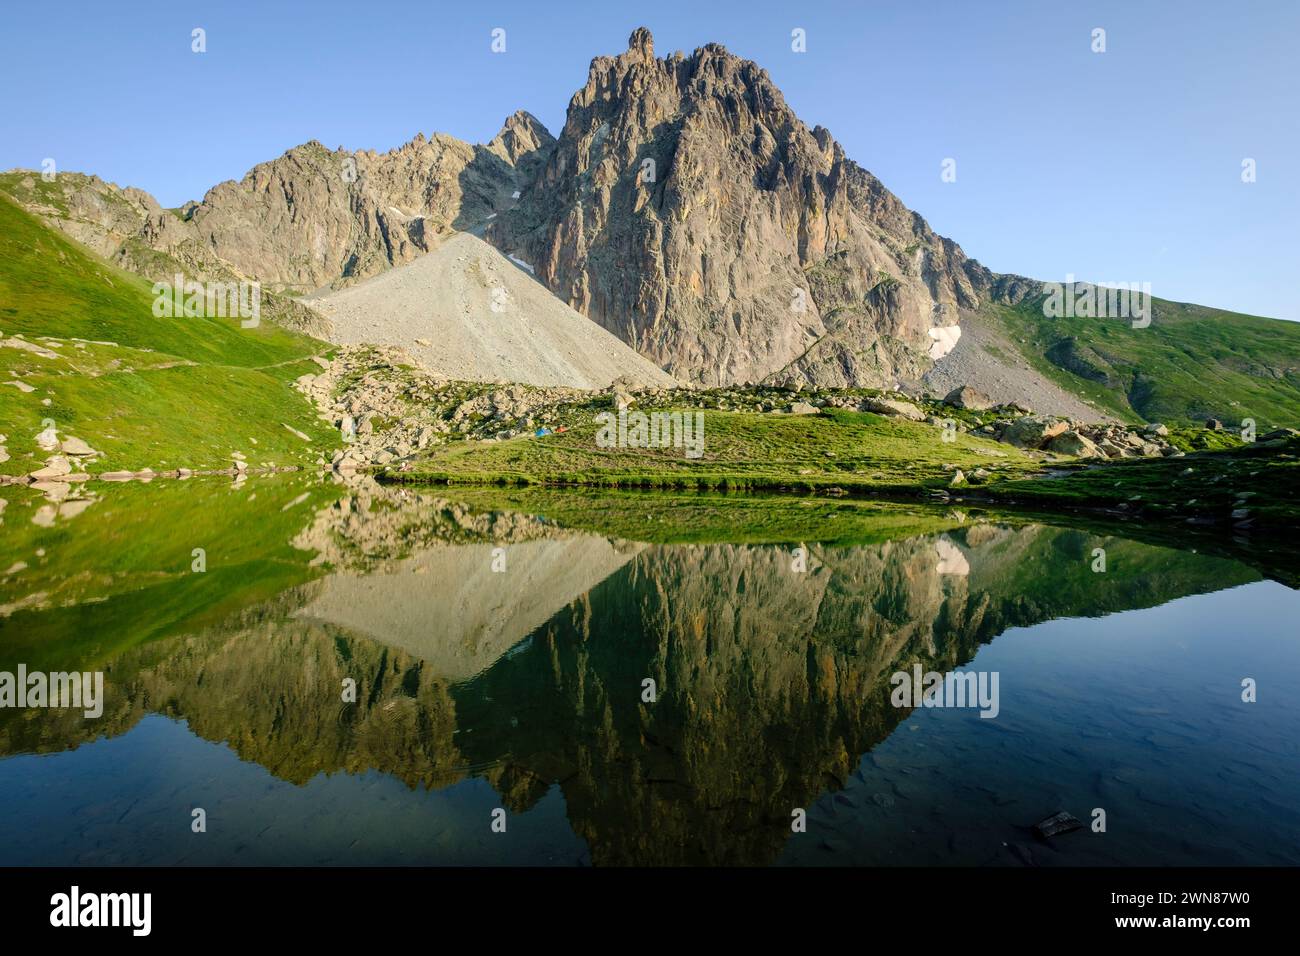 Midi d'Ossau peak, 2884 meters, and Pombie lake, Pyrenees National Park, Pyrenees Atlantiques, France Stock Photo